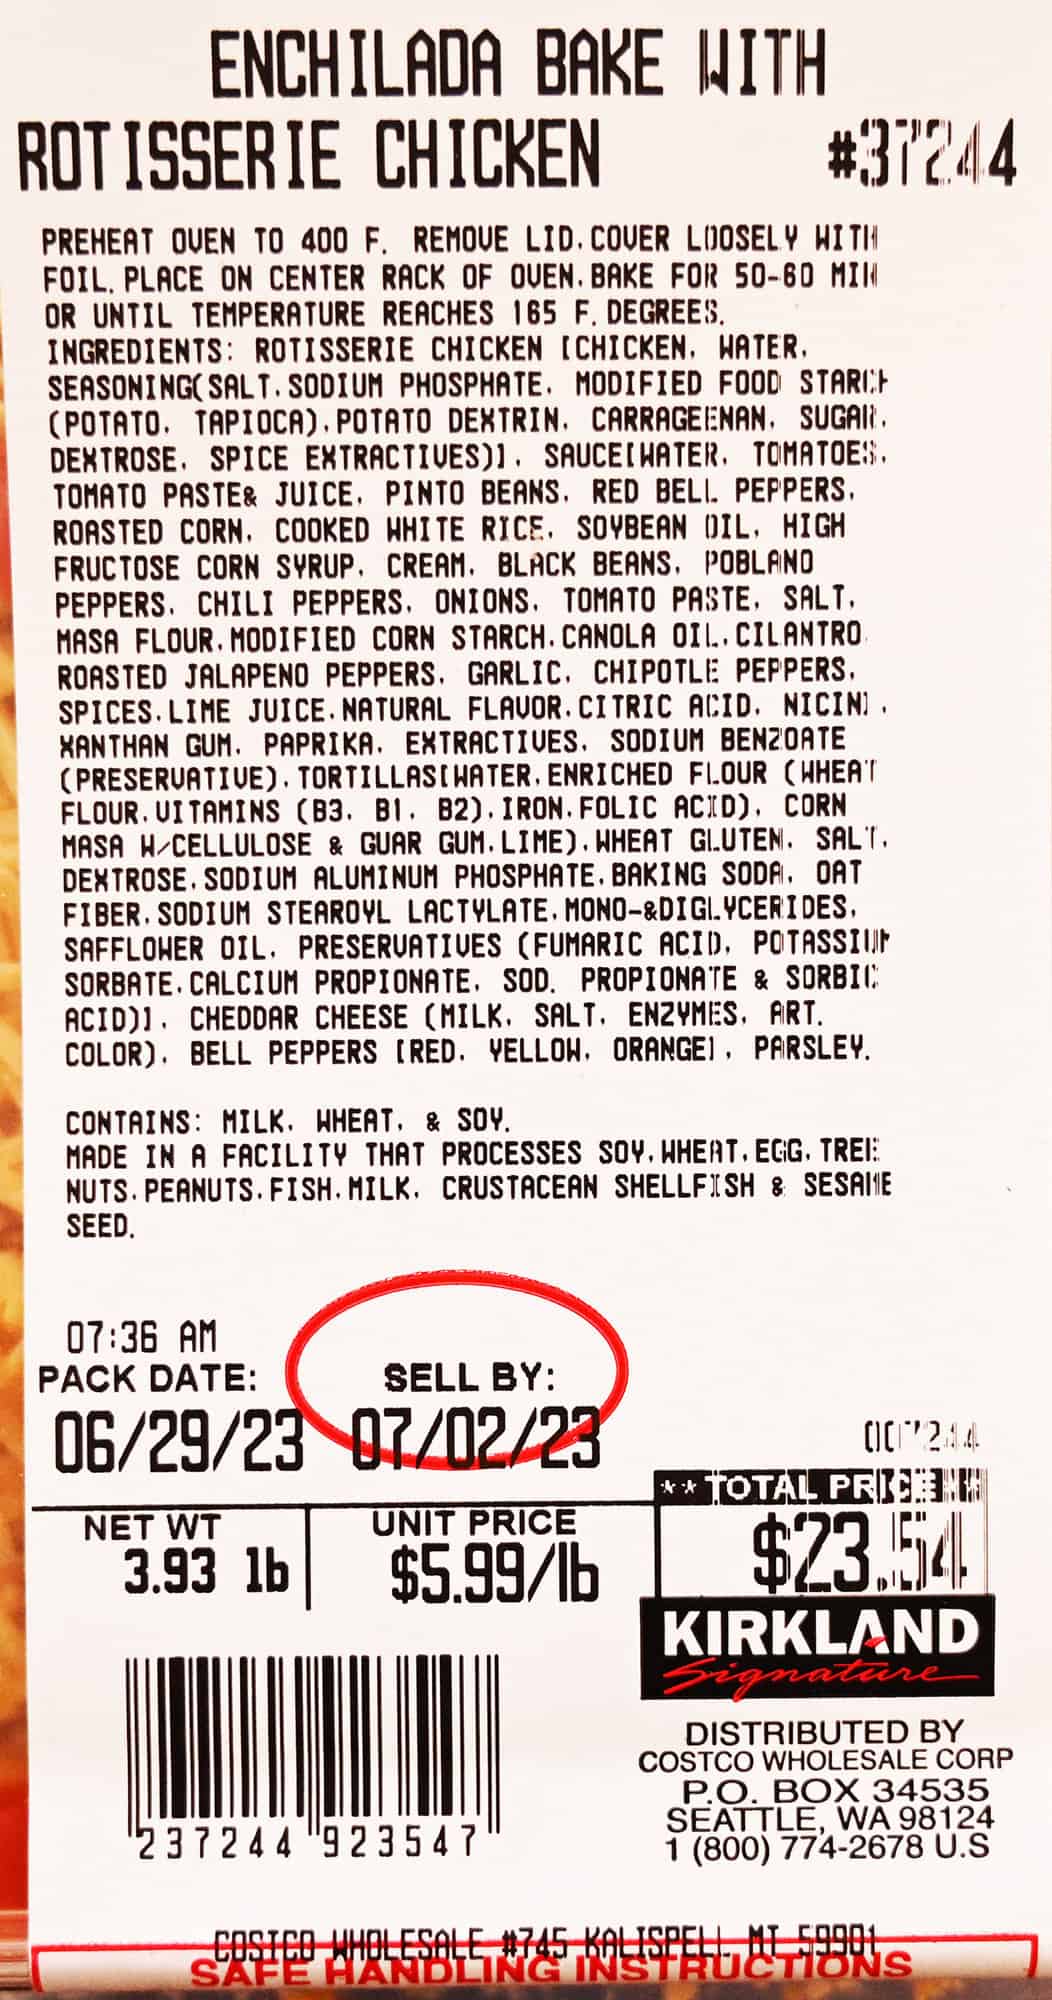 Image of the label from the Enchilada Bake showing ingredients, cost and best before date.